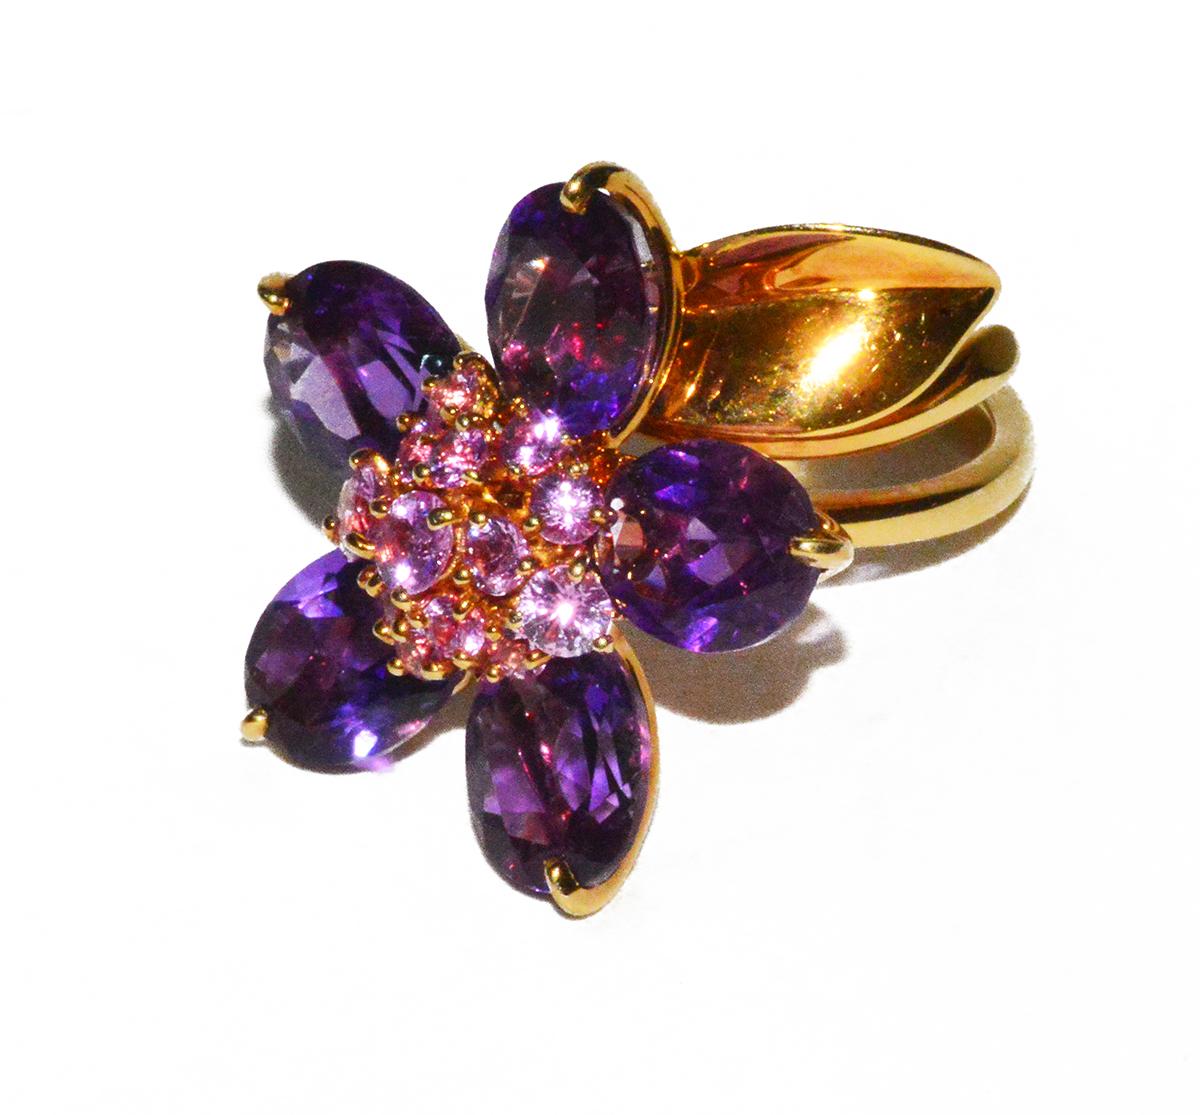 Though a bit difficult to show in pictures, this gorgeous flower ring by VCA rotates and moves.  The petals are amethyst and the stamen is made of pink sapphires. All set in 18K.